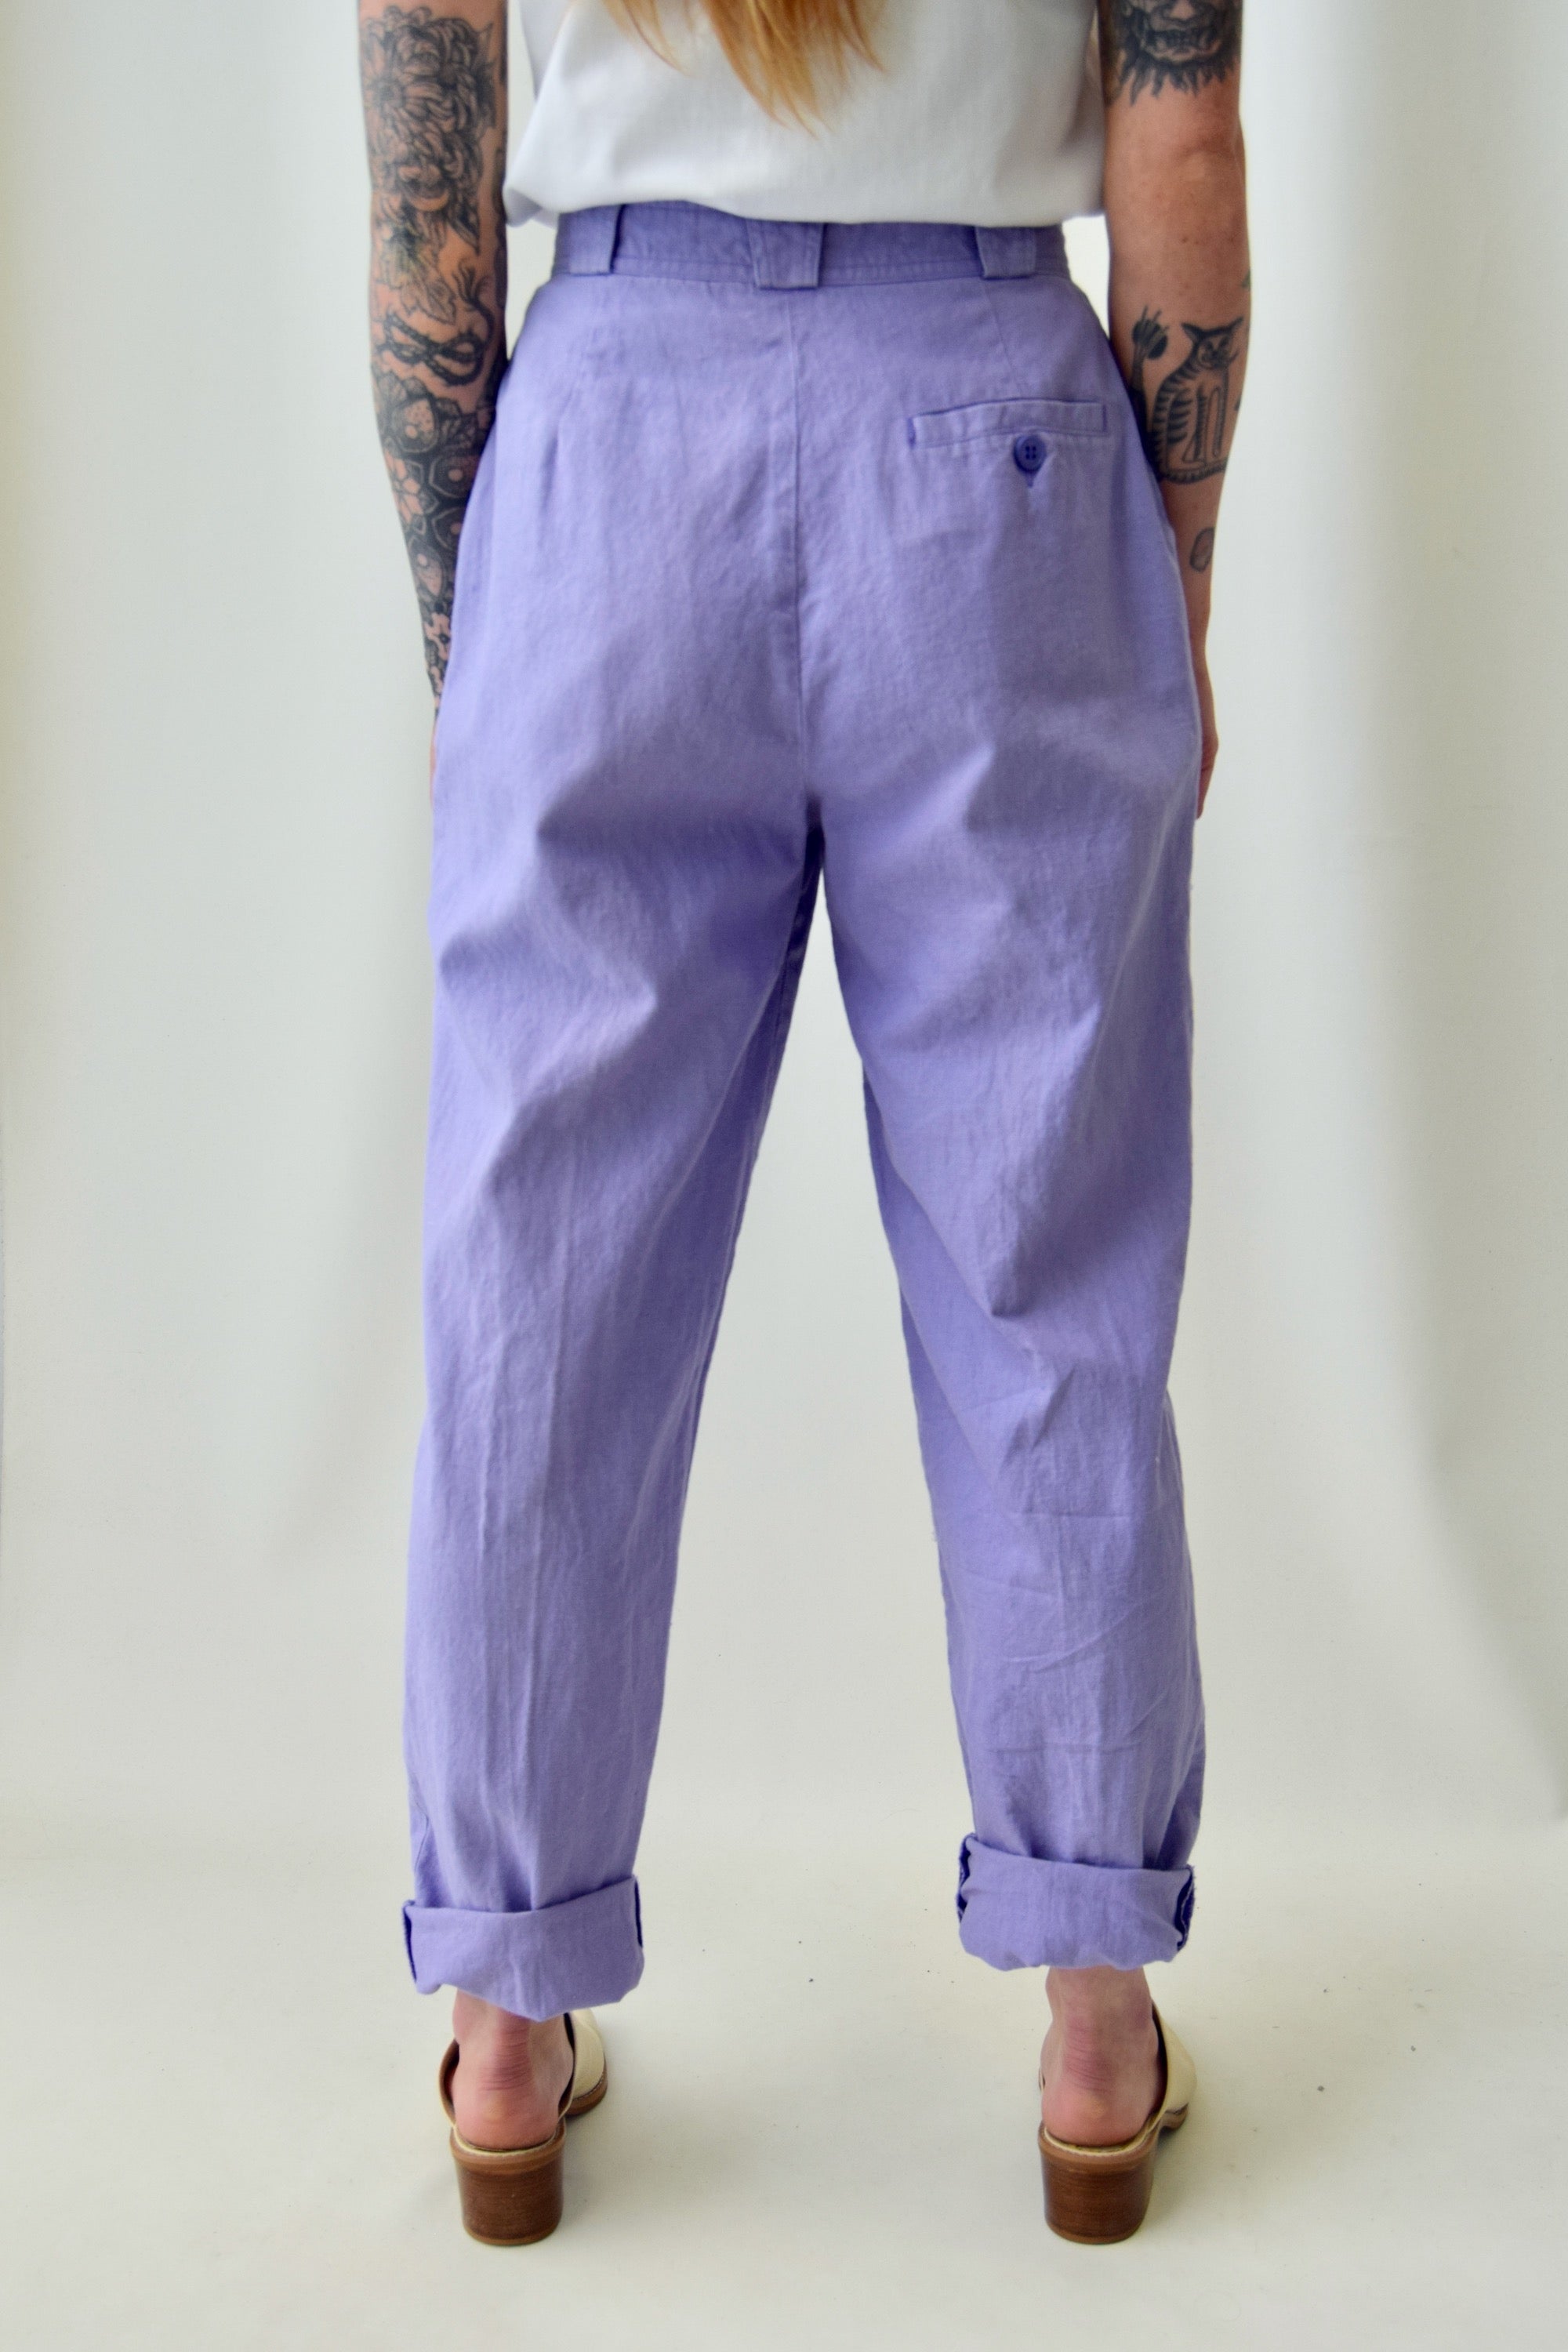 The Babysitters Club Trouser